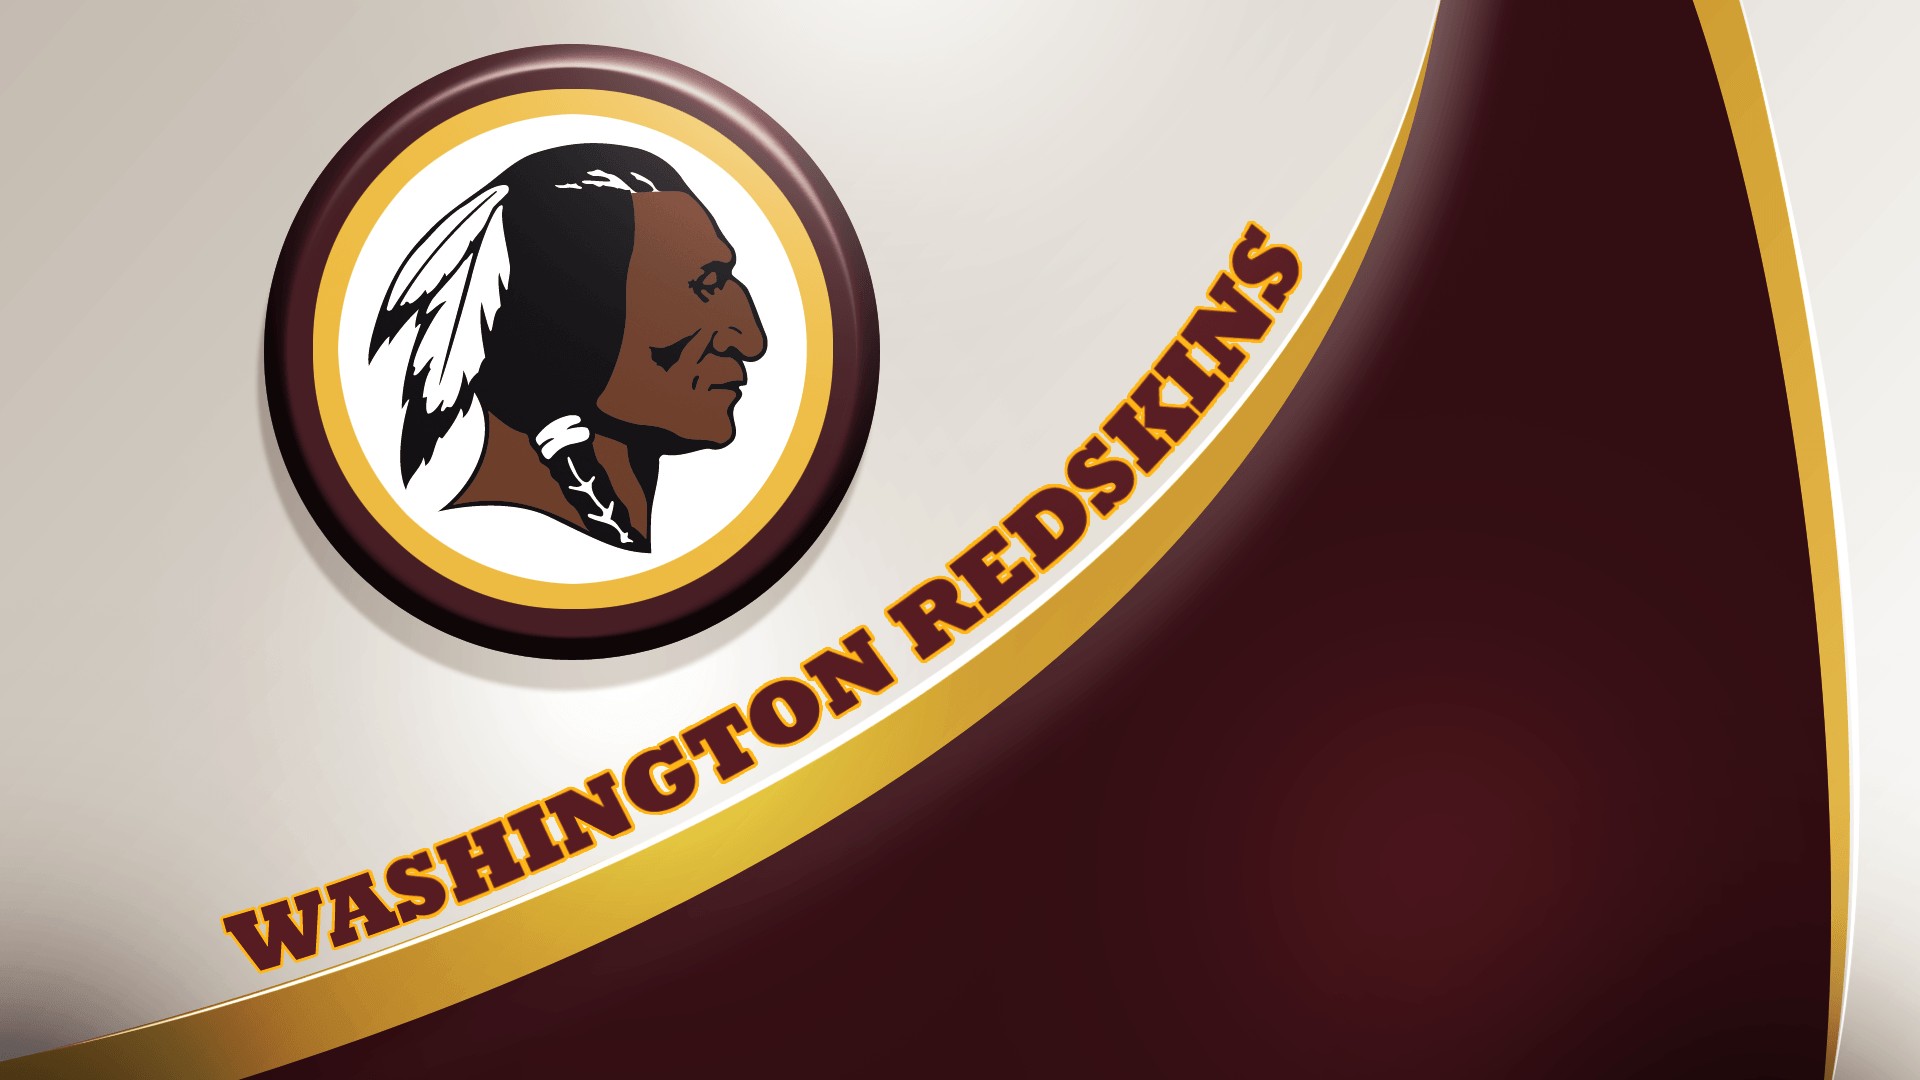 Washington Redskins Wallpaper in HD with high-resolution 1920x1080 pixel. Download and set as wallpaper for Desktop Computer, Apple iPhone X, XS Max, XR, 8, 7, 6, SE, iPad, Android